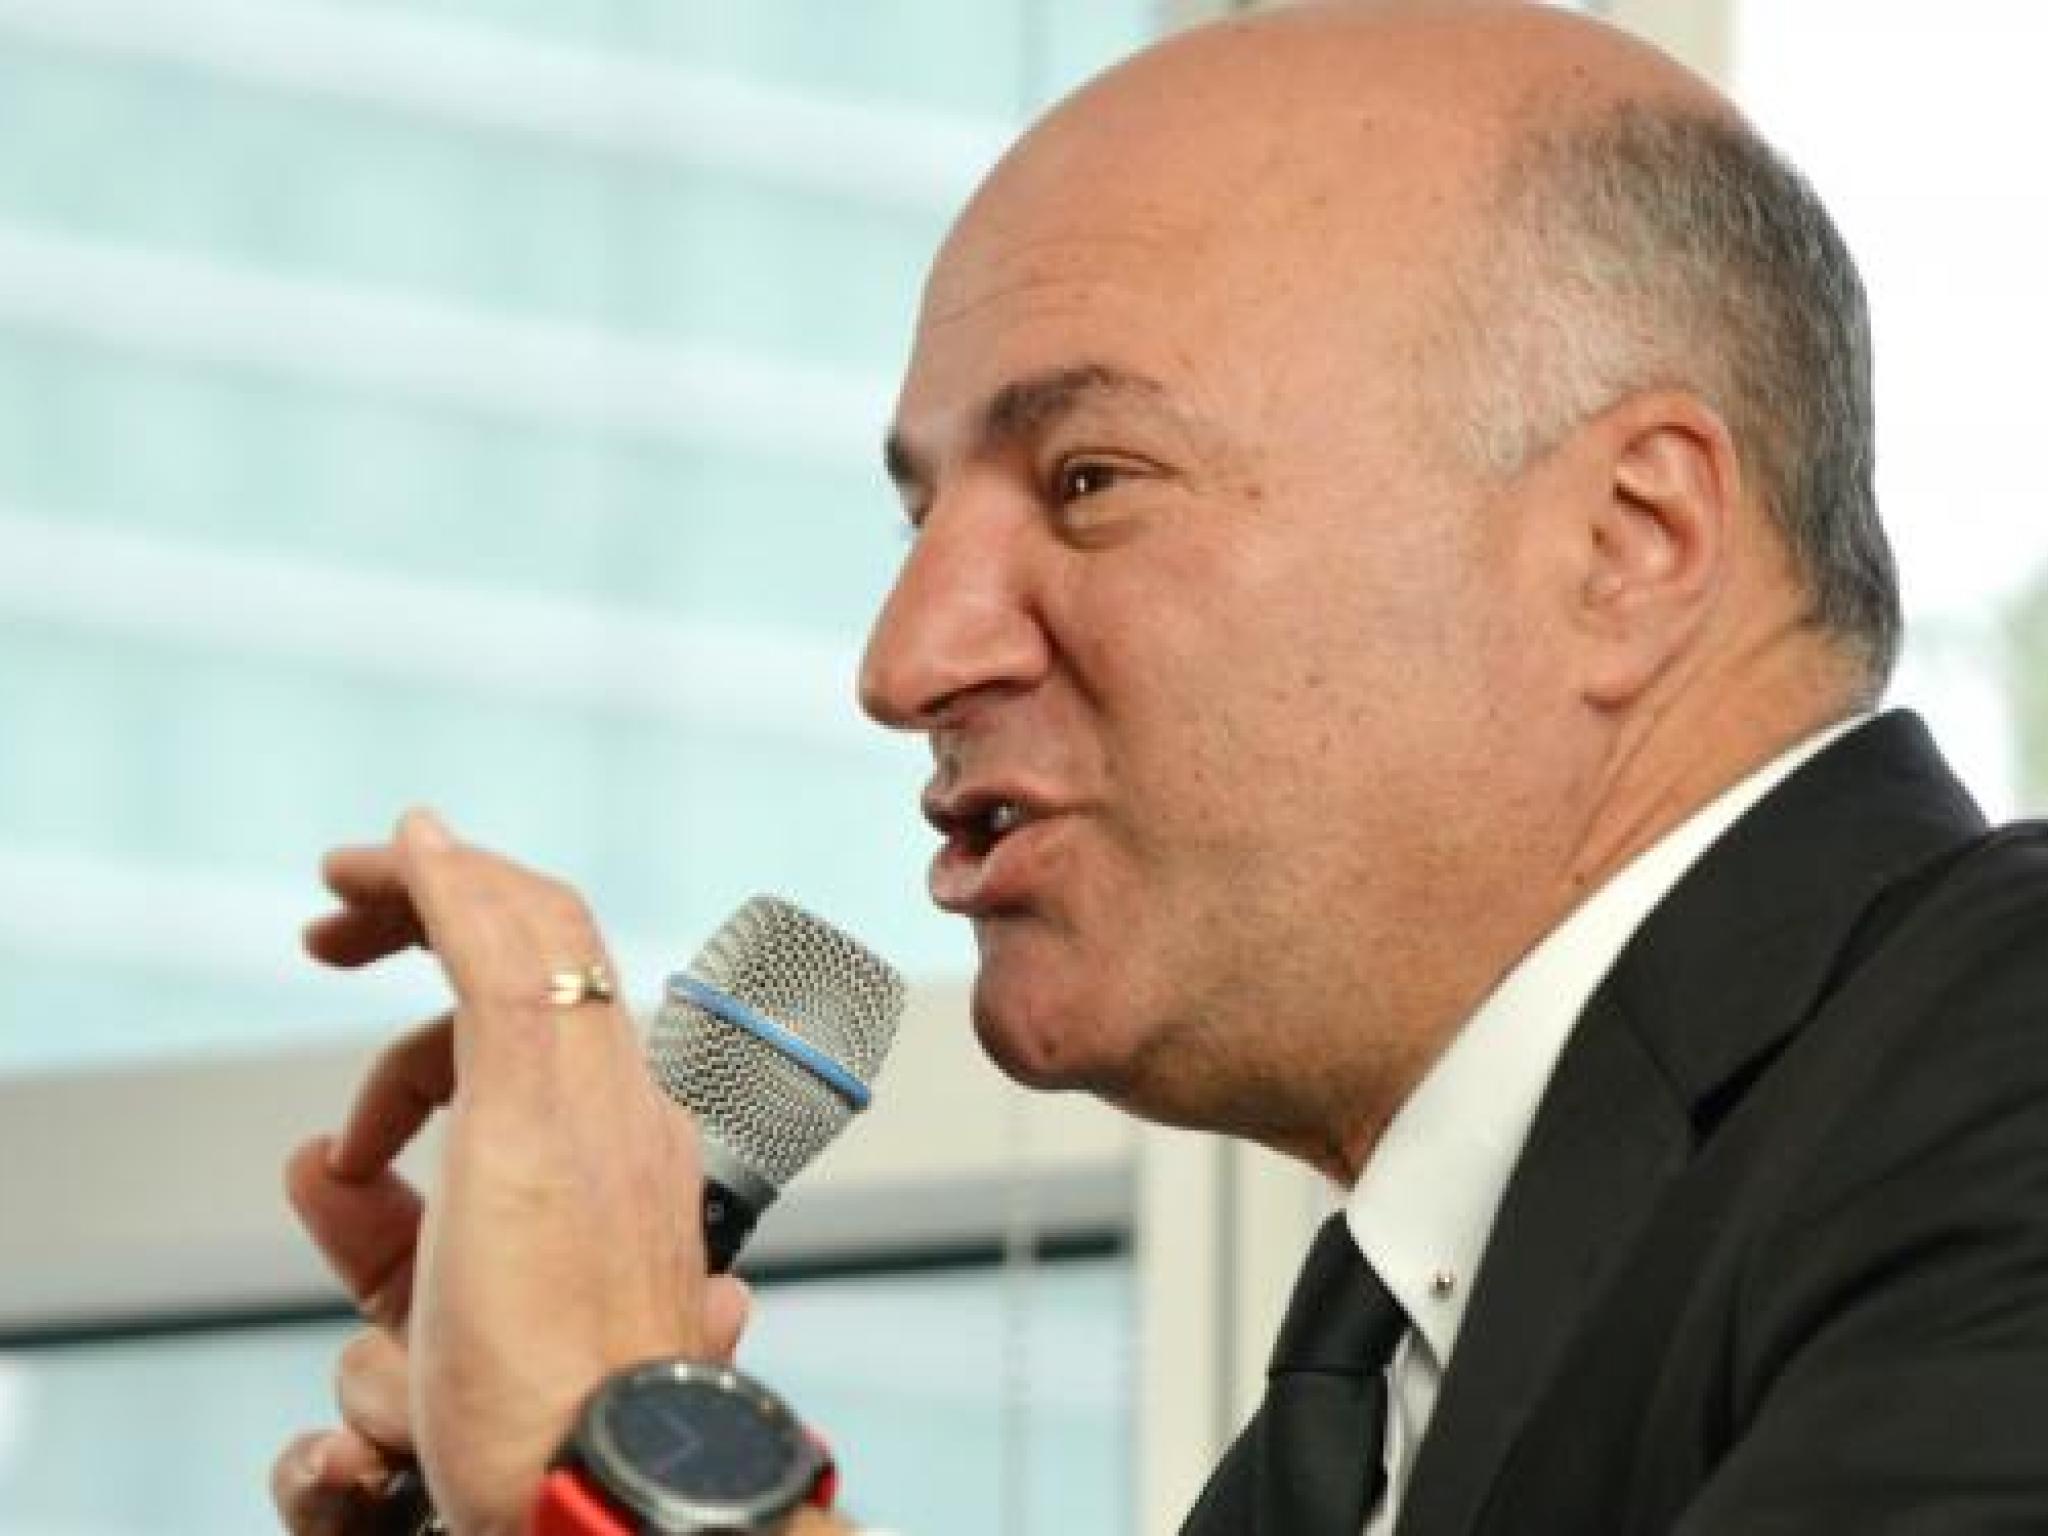  kevin-oleary-shares-spac-picks-impressions 